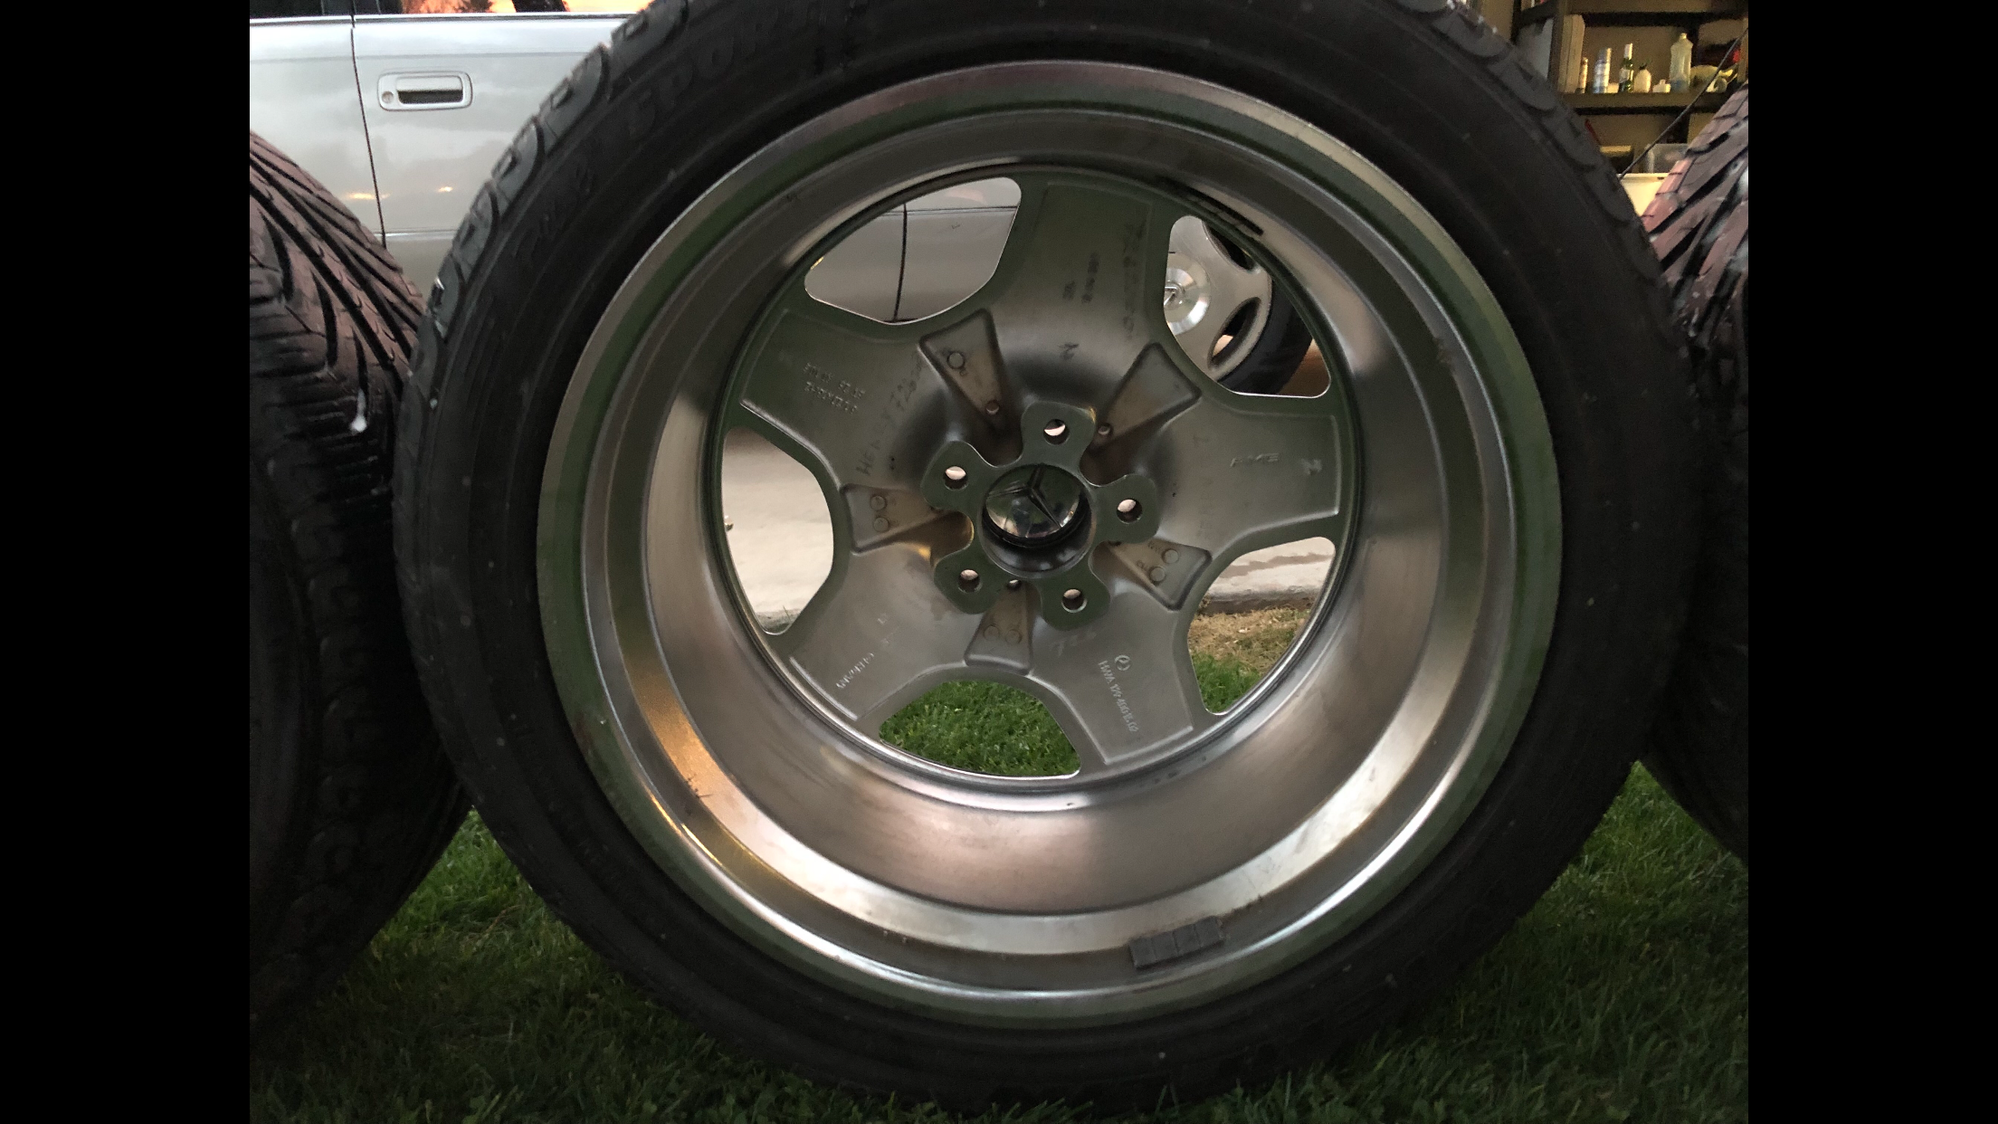 Wheels and Tires/Axles - Rare authentic bbs amg 2 piece staggered chrome monoblock wheels. - Used - Phoenix, AZ 85233, United States